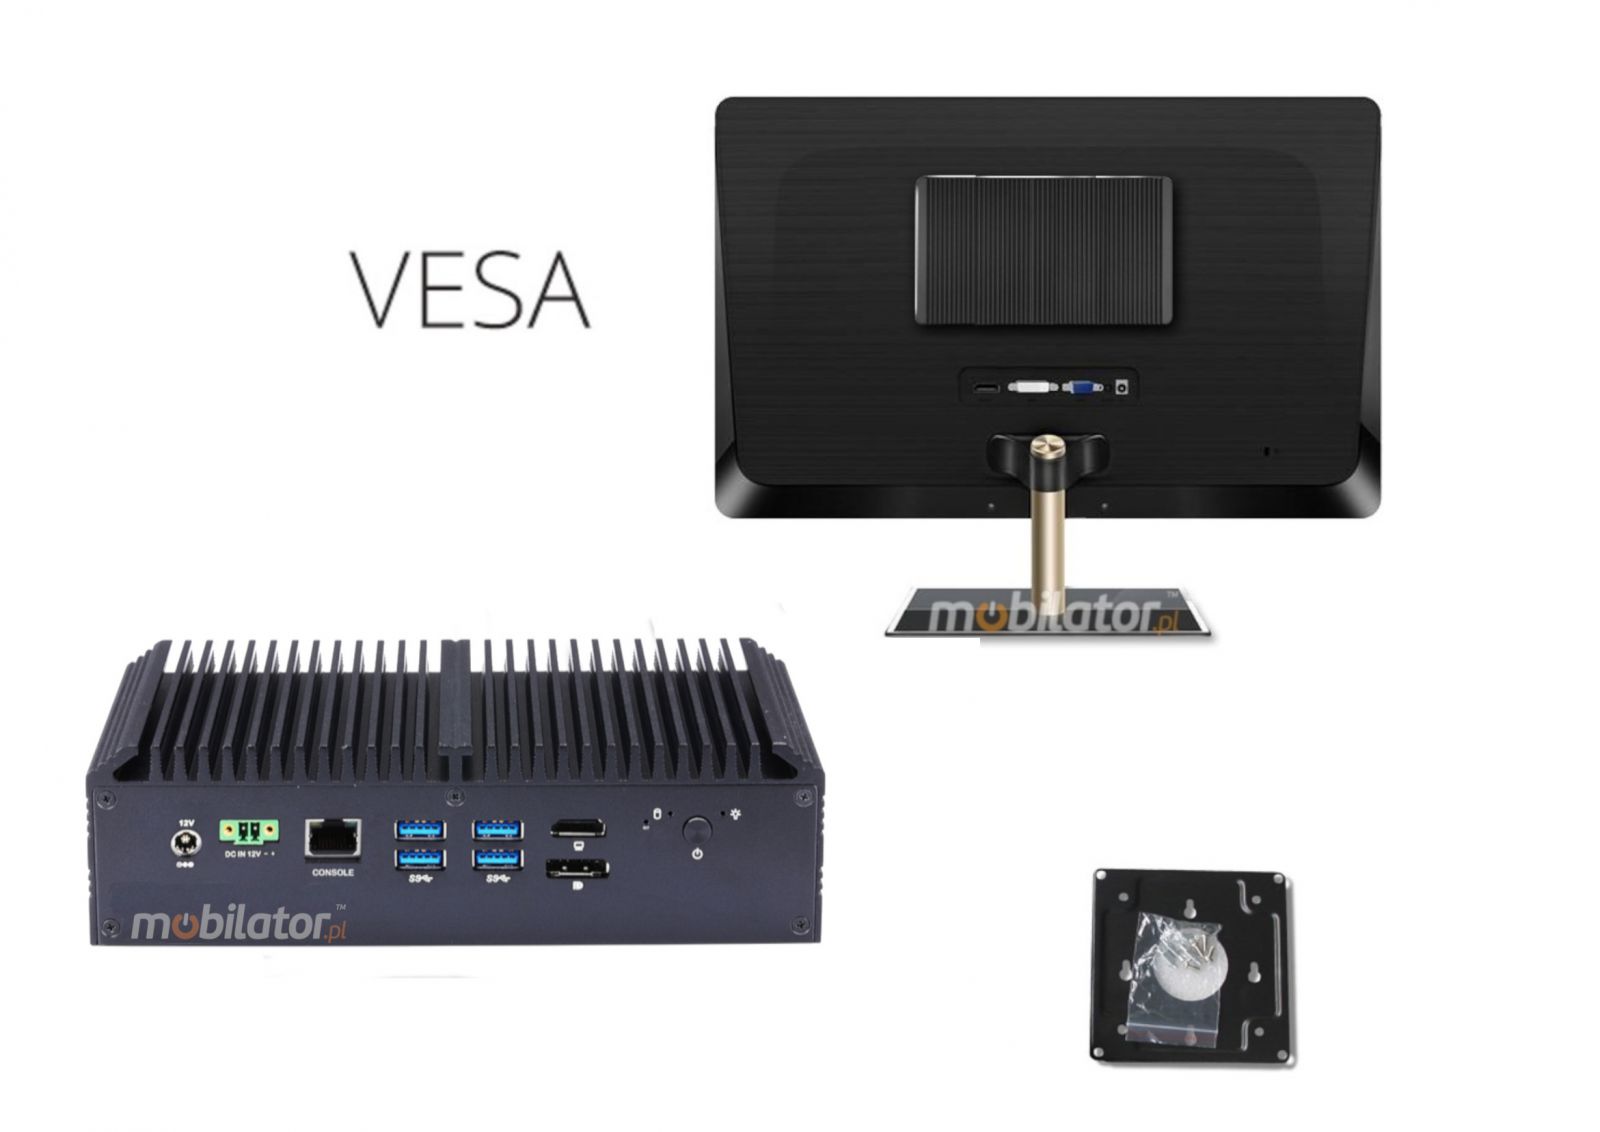 VESA mount helps to attach the Q1012GE to the monitor